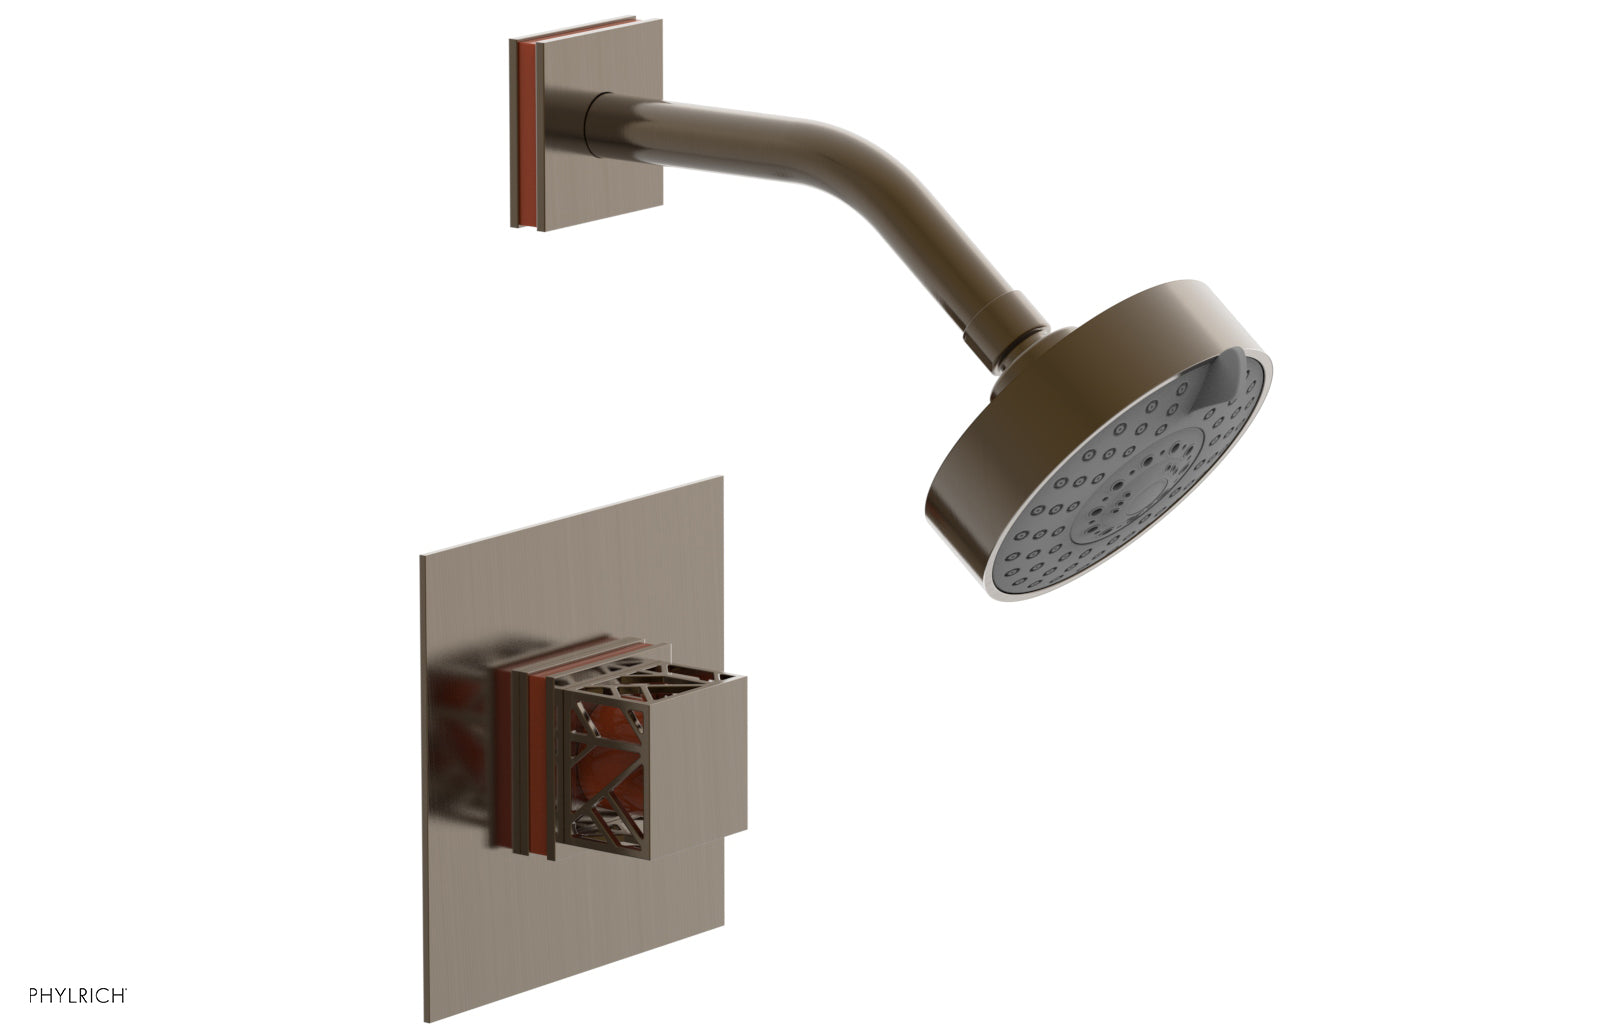 Phylrich JOLIE Pressure Balance Shower Set - Square Handle with "Orange" Accents